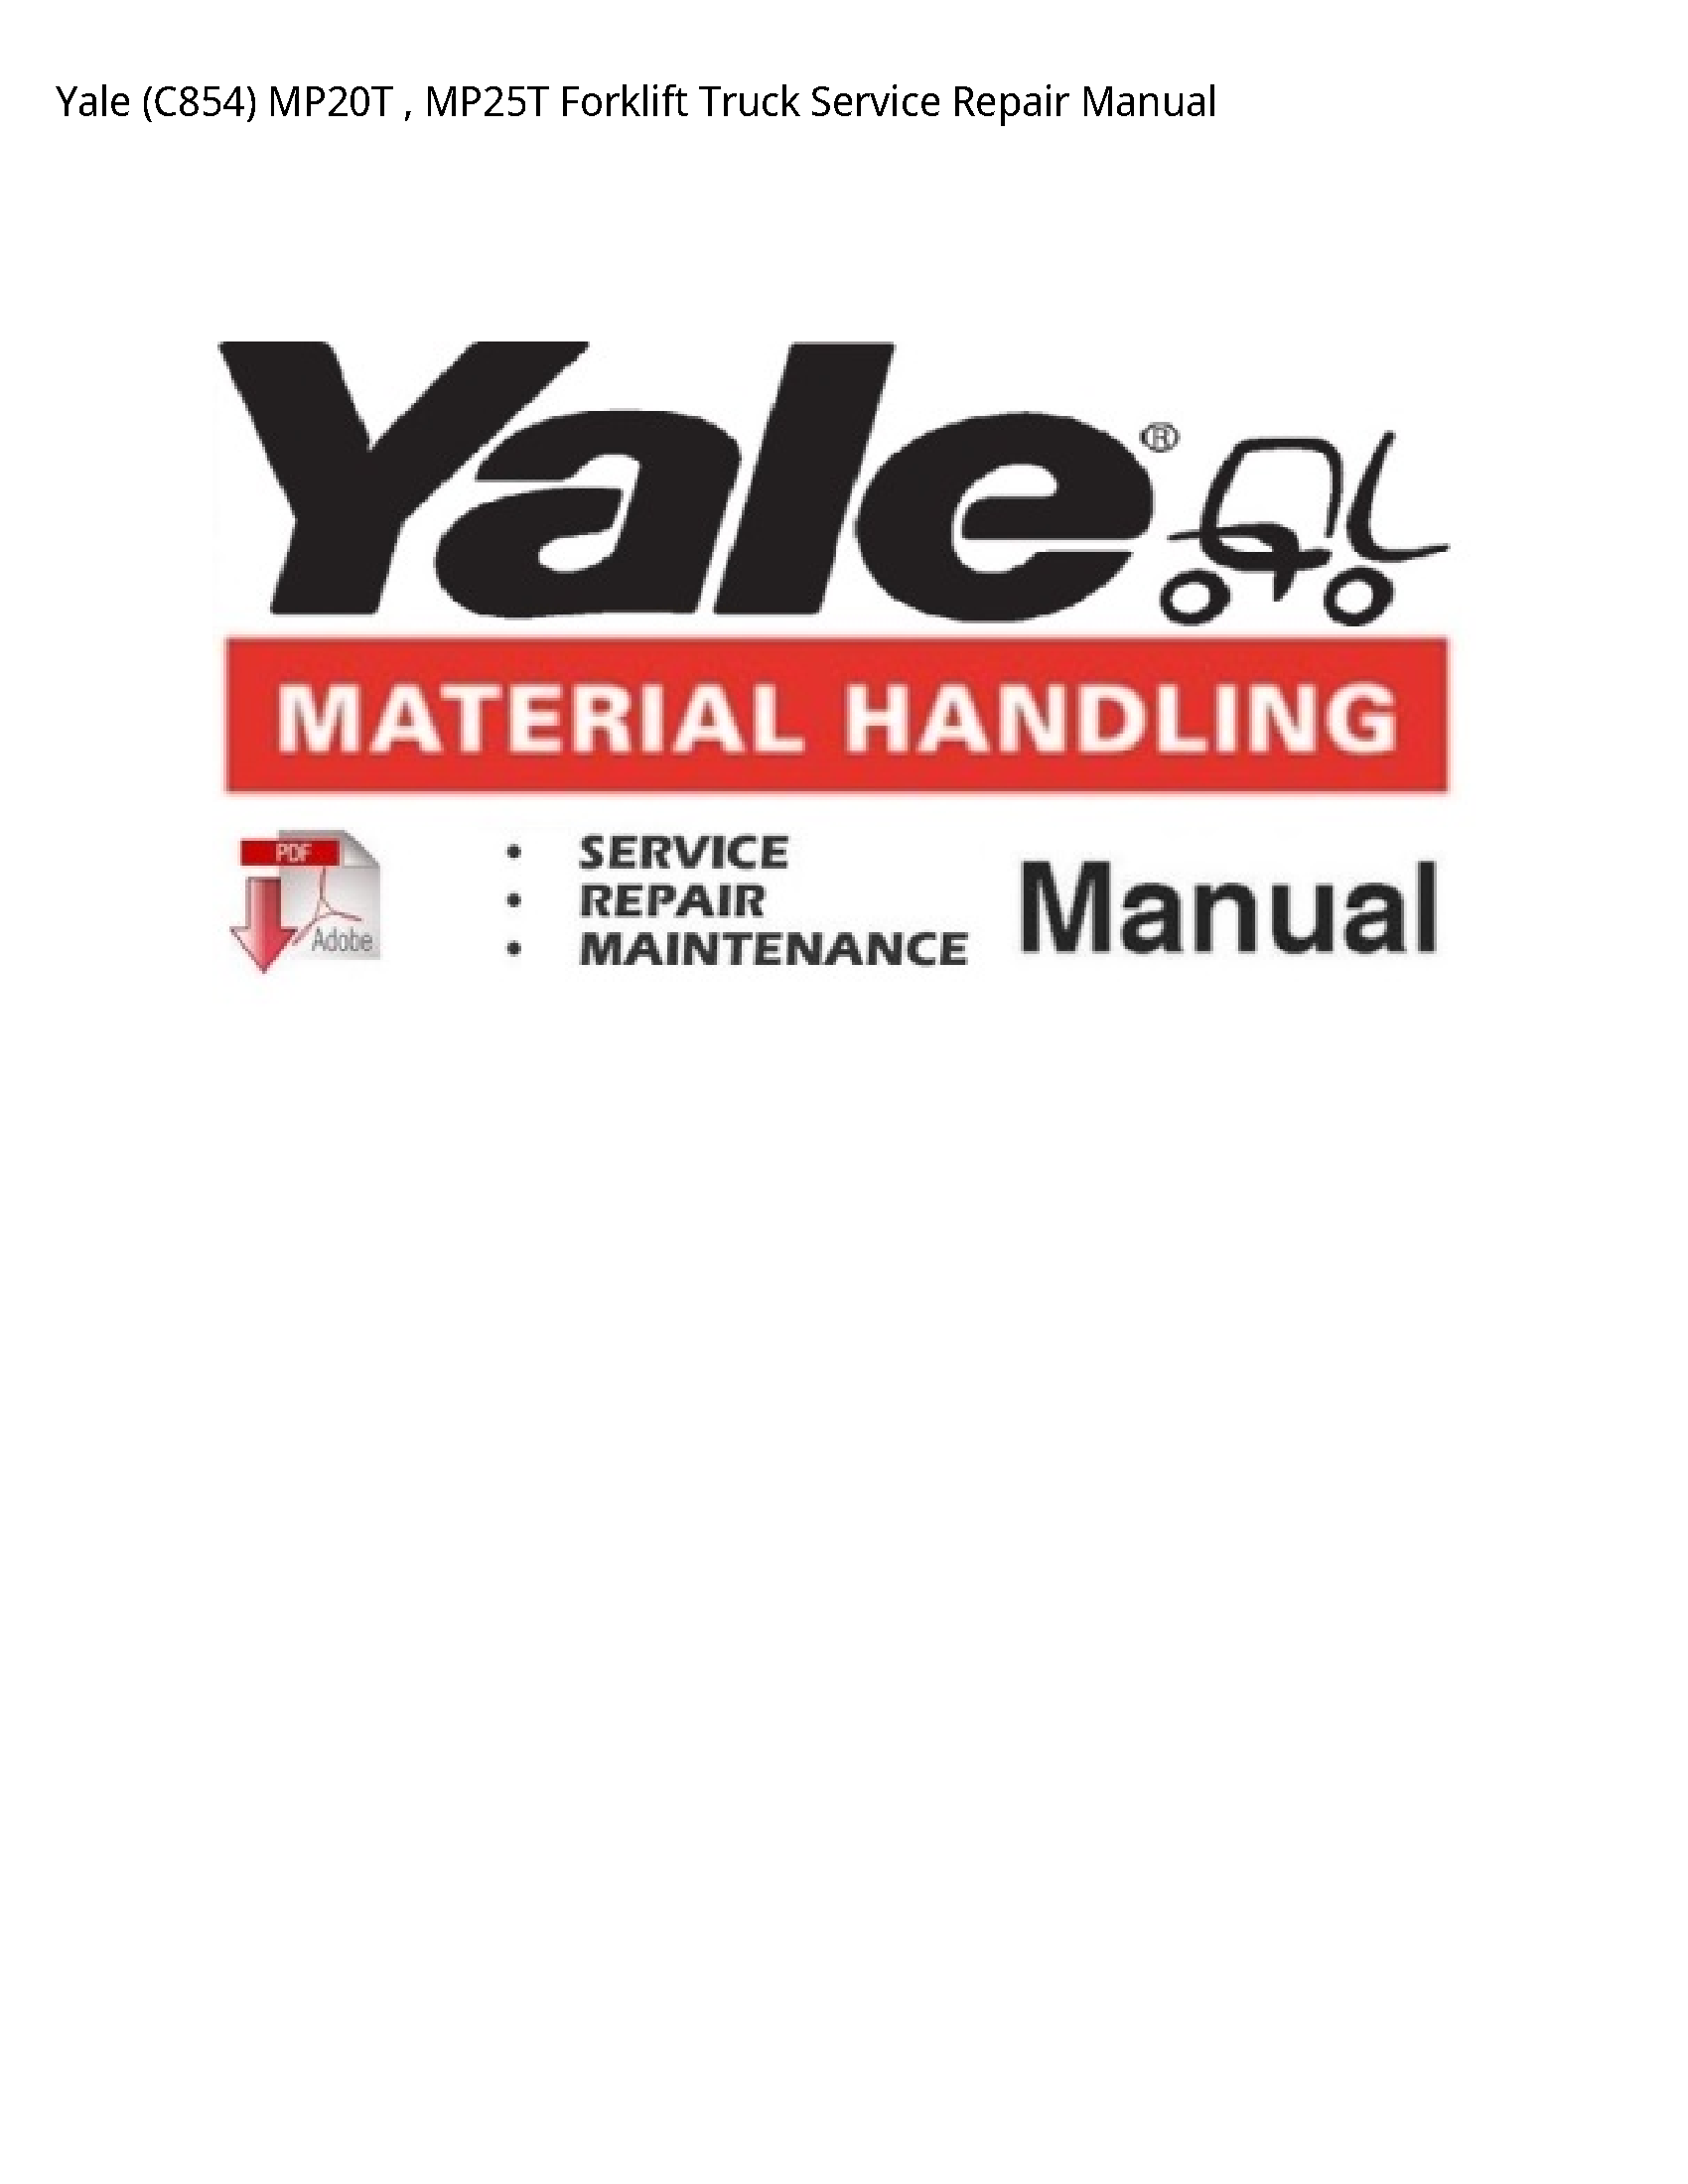 Yale (C854) Forklift Truck manual